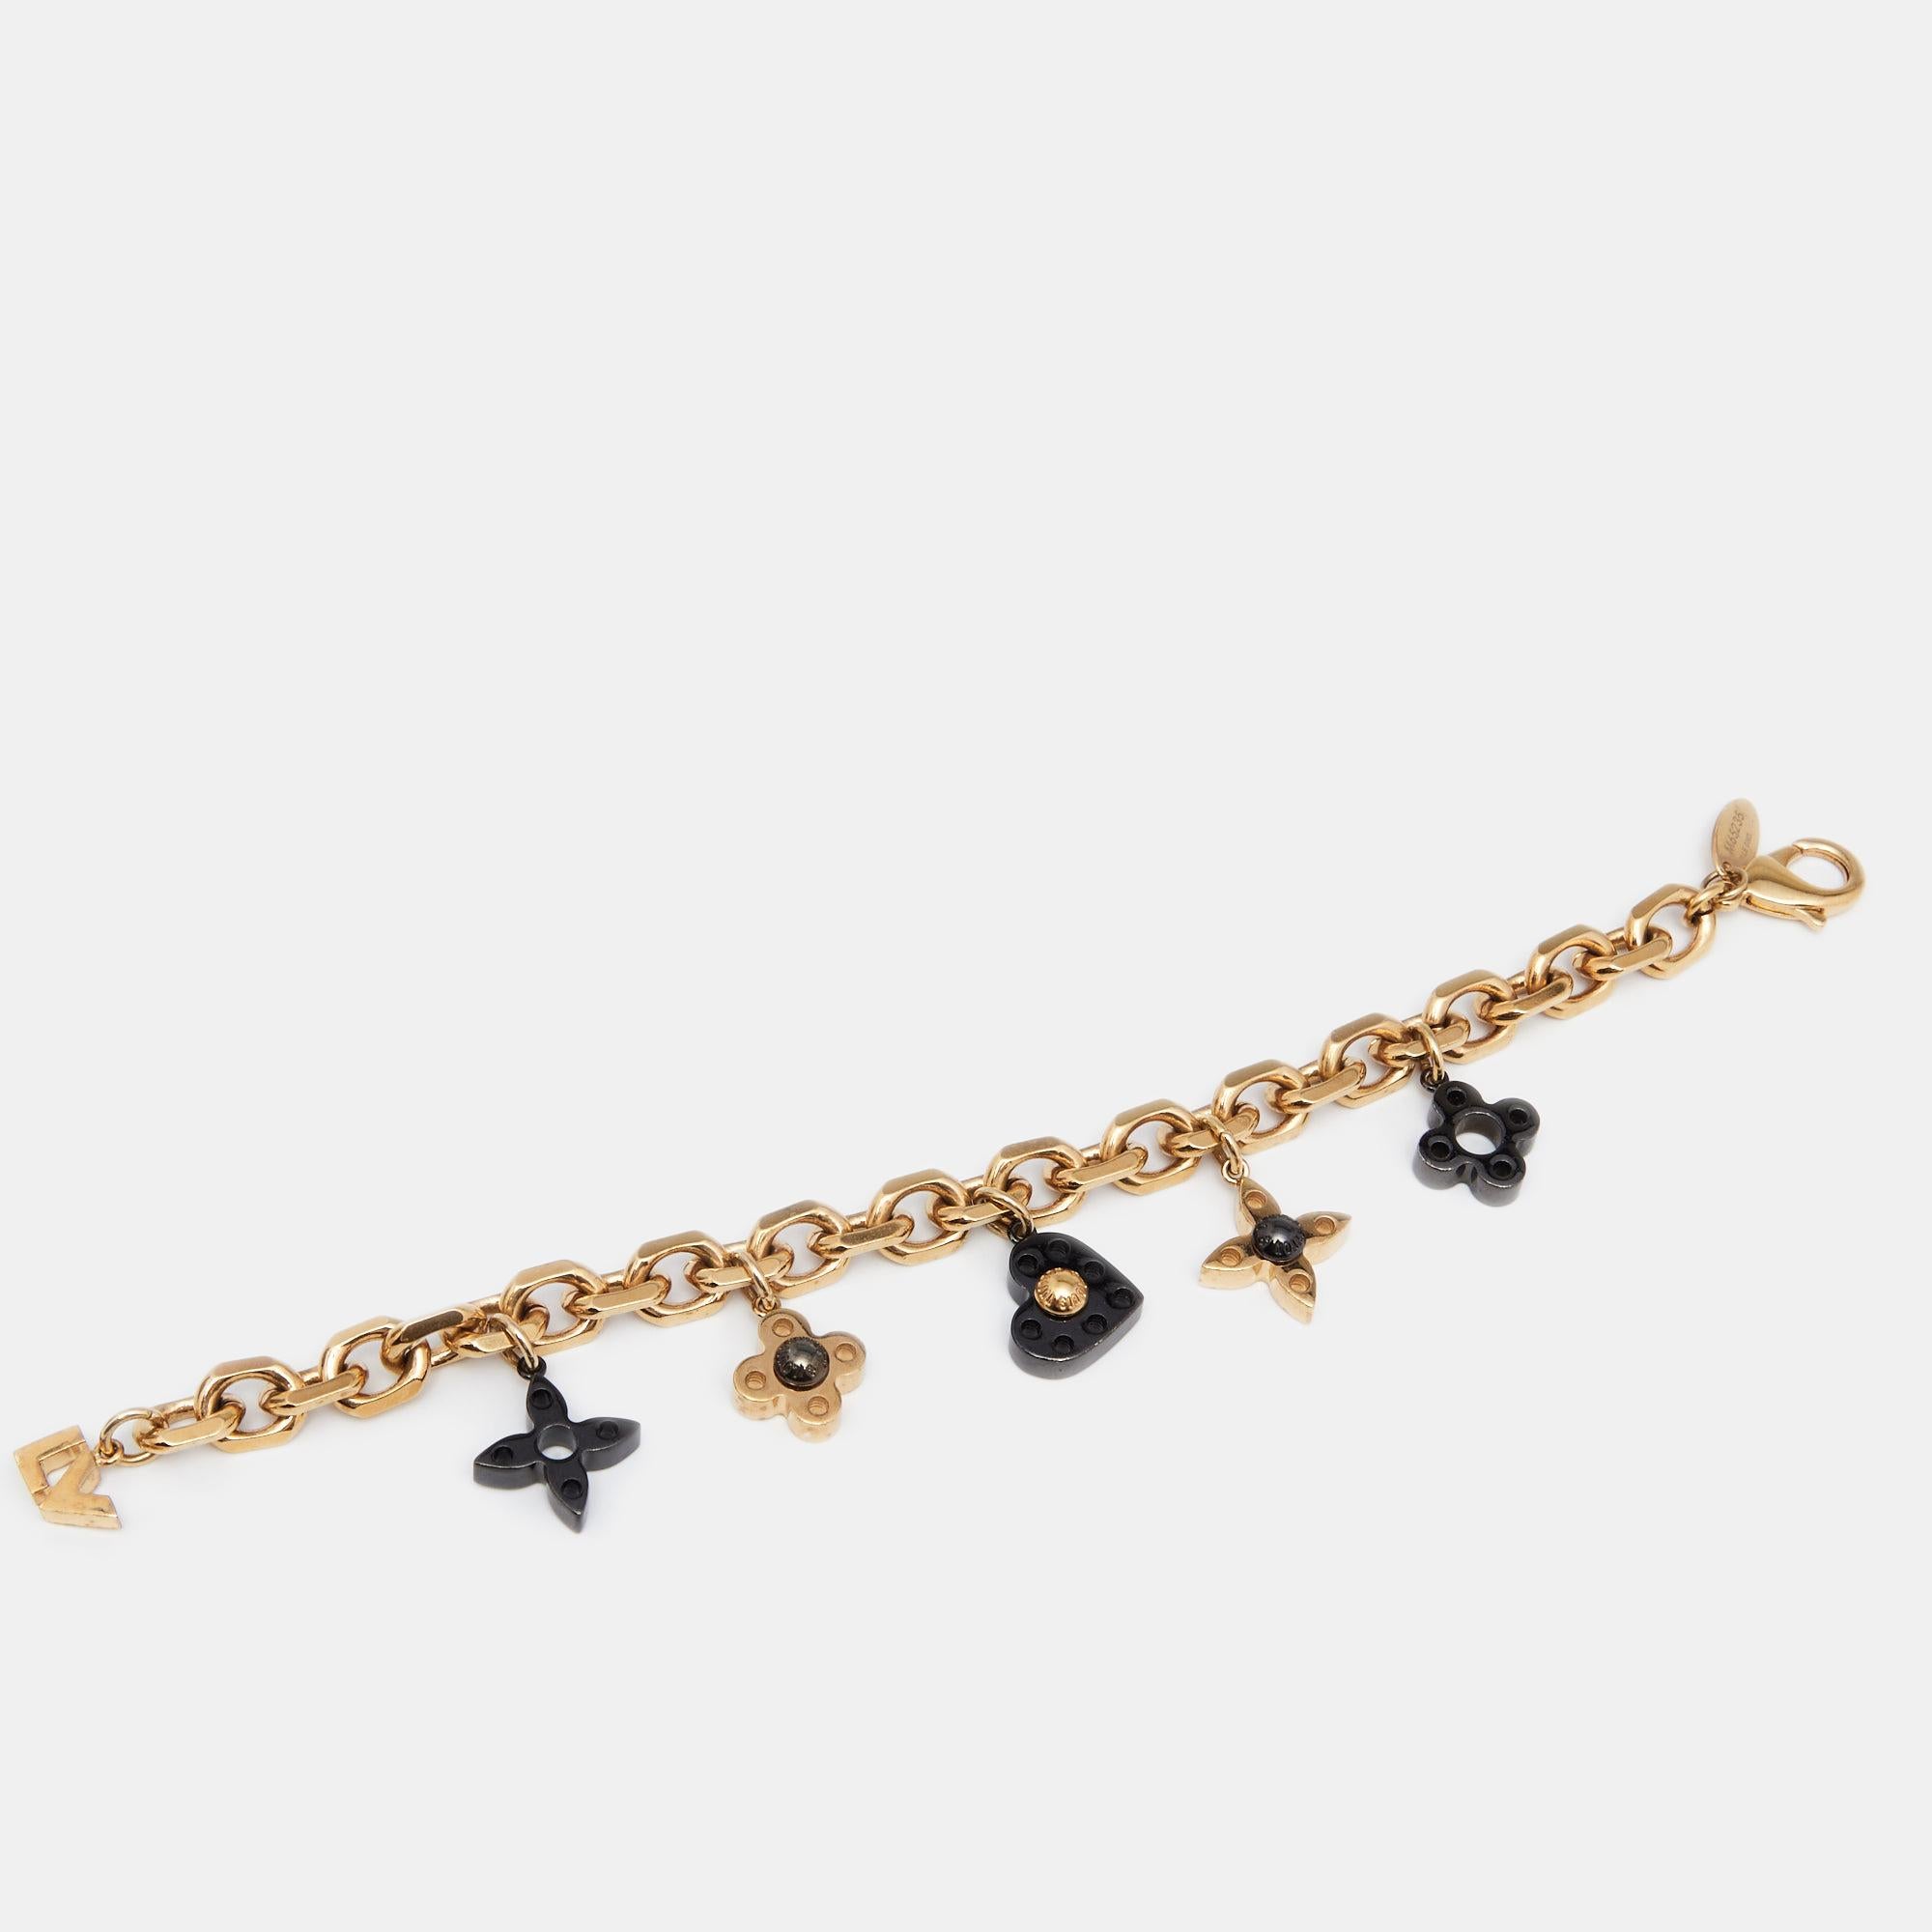 Louis Vuitton brings this fabulous bracelet rendered in an elegant silhouette for the woman who is ready to ace every accessory game. It is sure to catch an eye and make your heart skip a beat. Flaunt it with your all looks, from formal to casual.